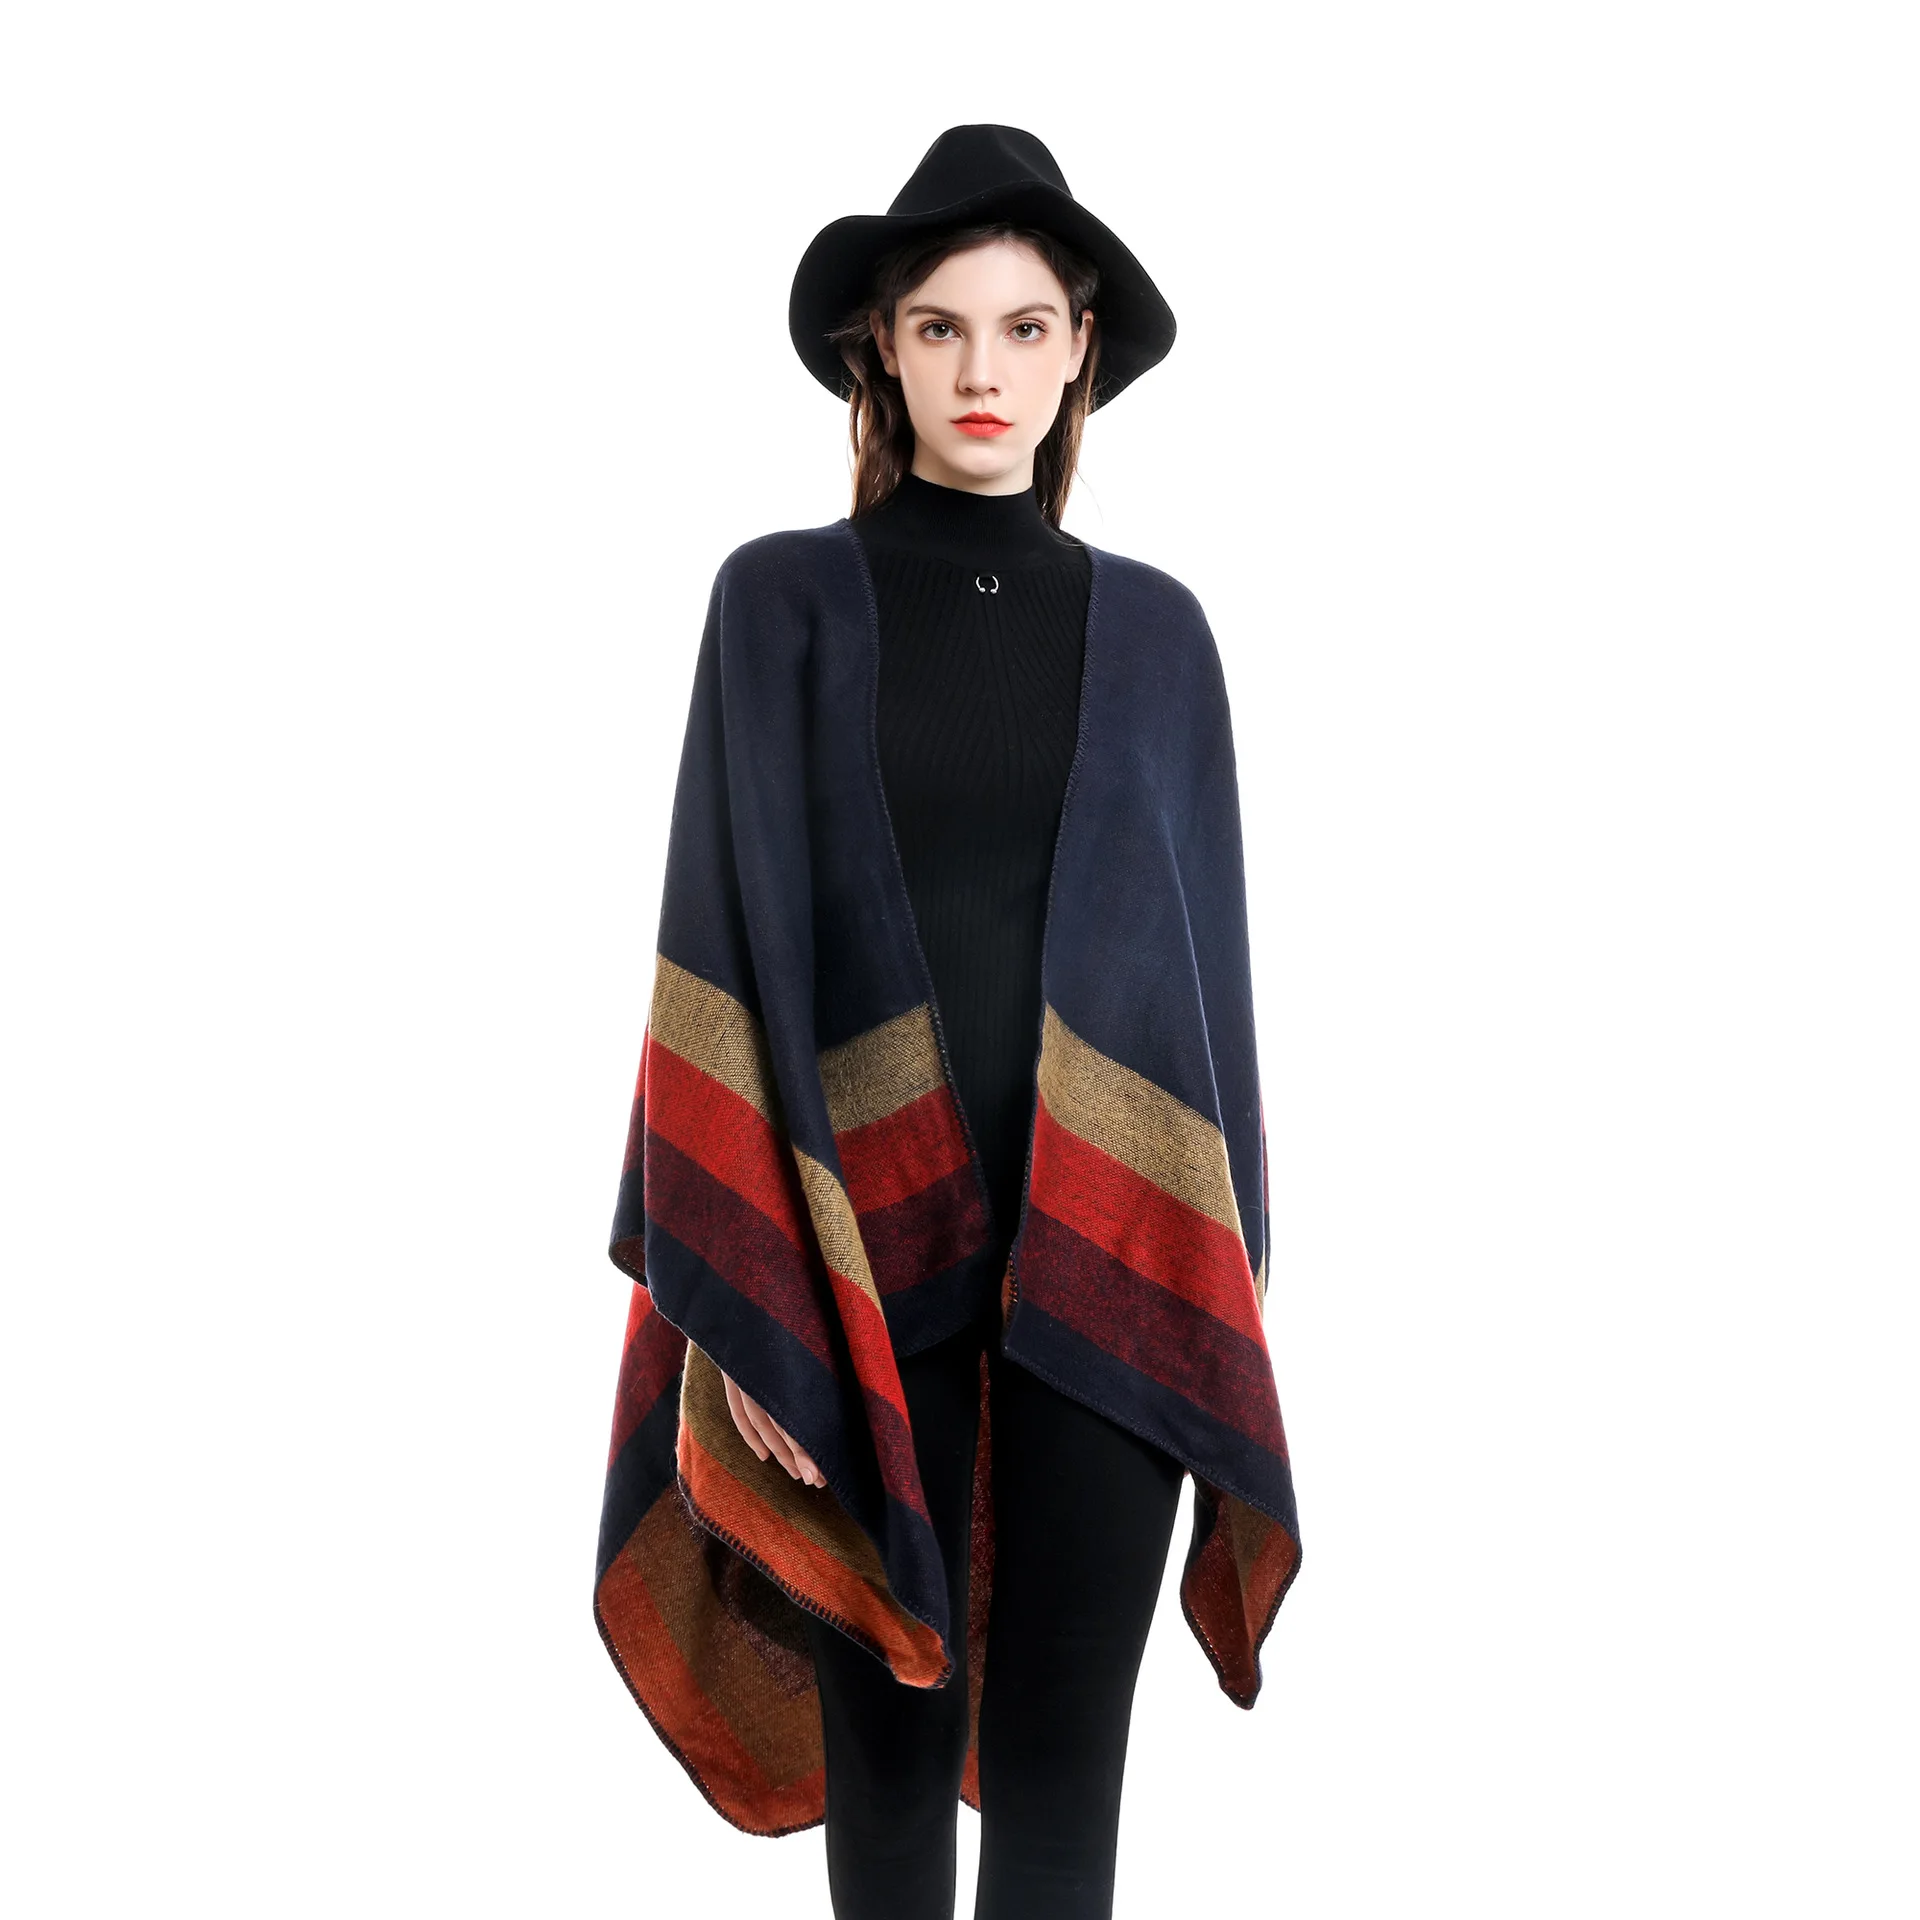 Women Cashmere Feel Shawl Lady Classic Striped Vintage Cape Spring Autumn Retro Cardigan Winter Cloak Soft Large Blanket New in